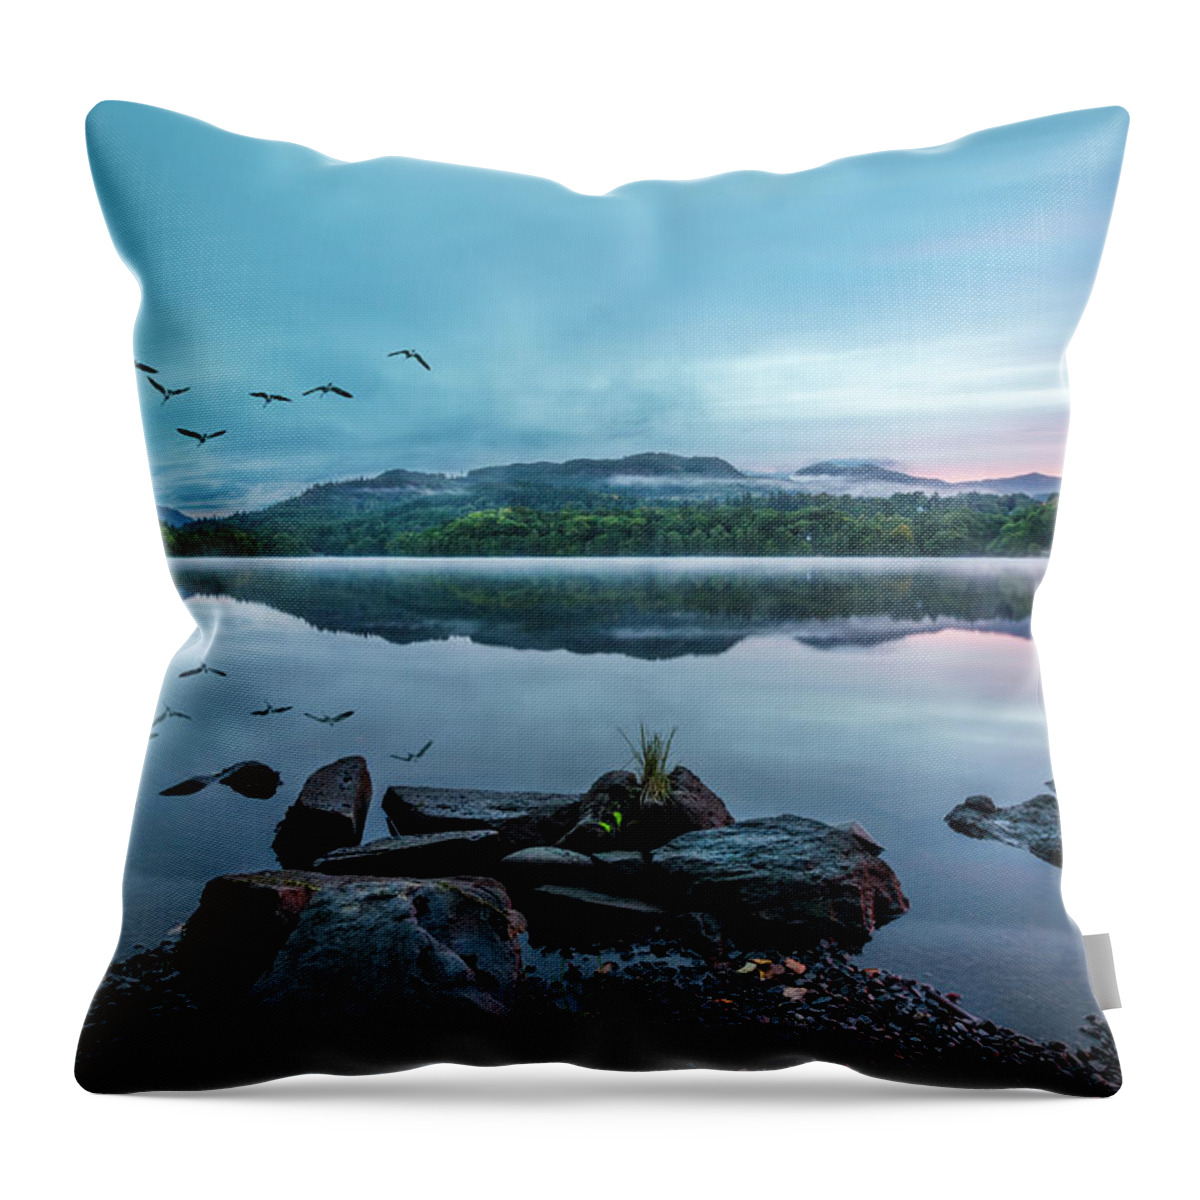 Clouds Throw Pillow featuring the photograph Morning Calm at the Lake by Debra and Dave Vanderlaan